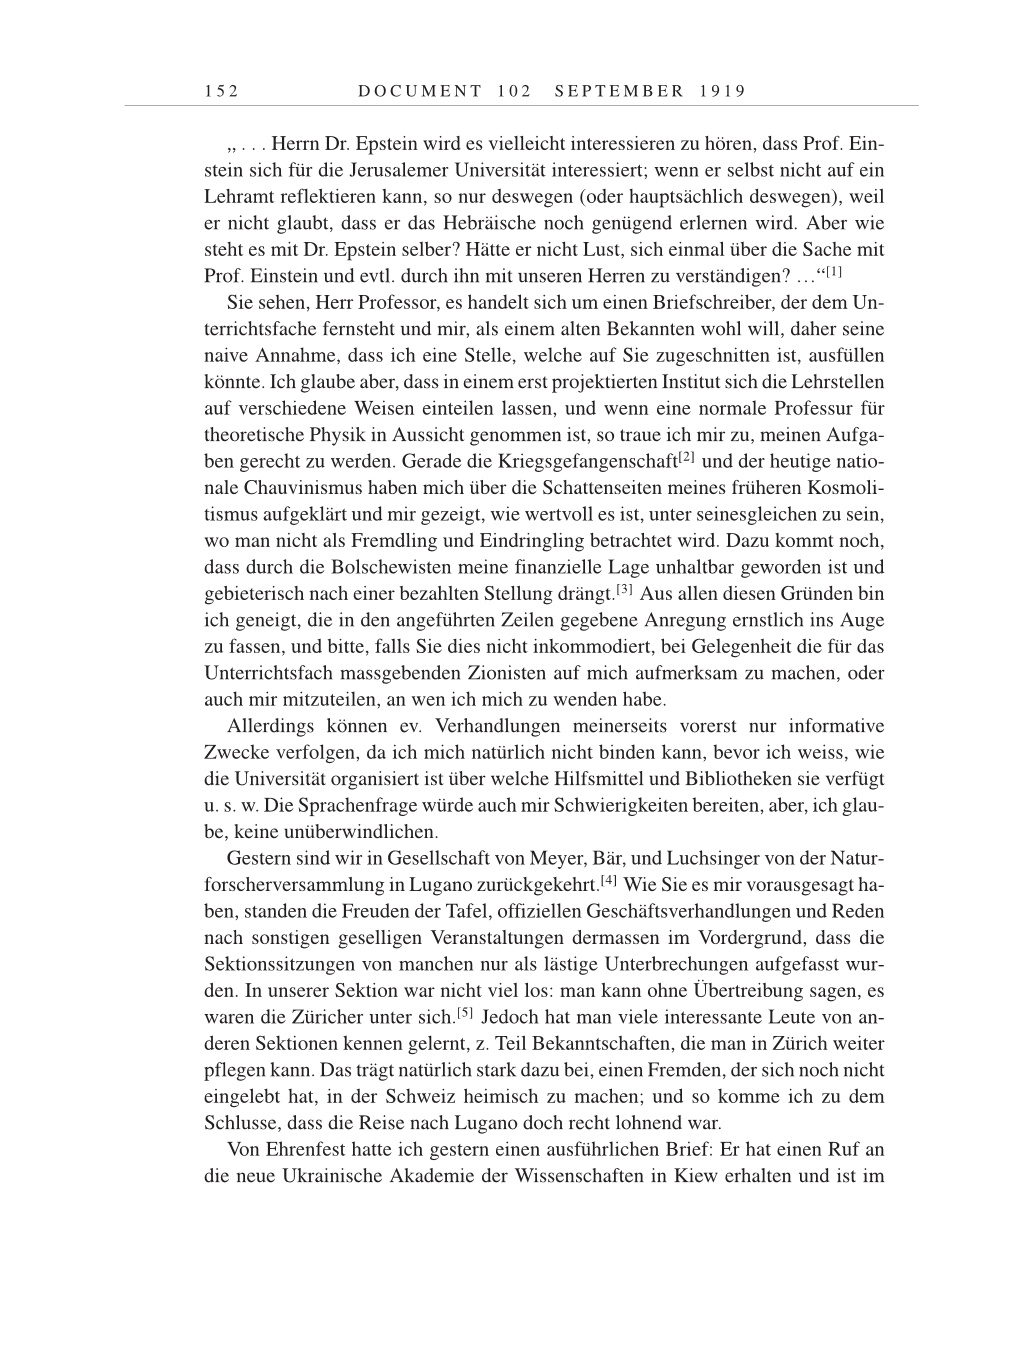 Volume 9: The Berlin Years: Correspondence January 1919-April 1920 page 152